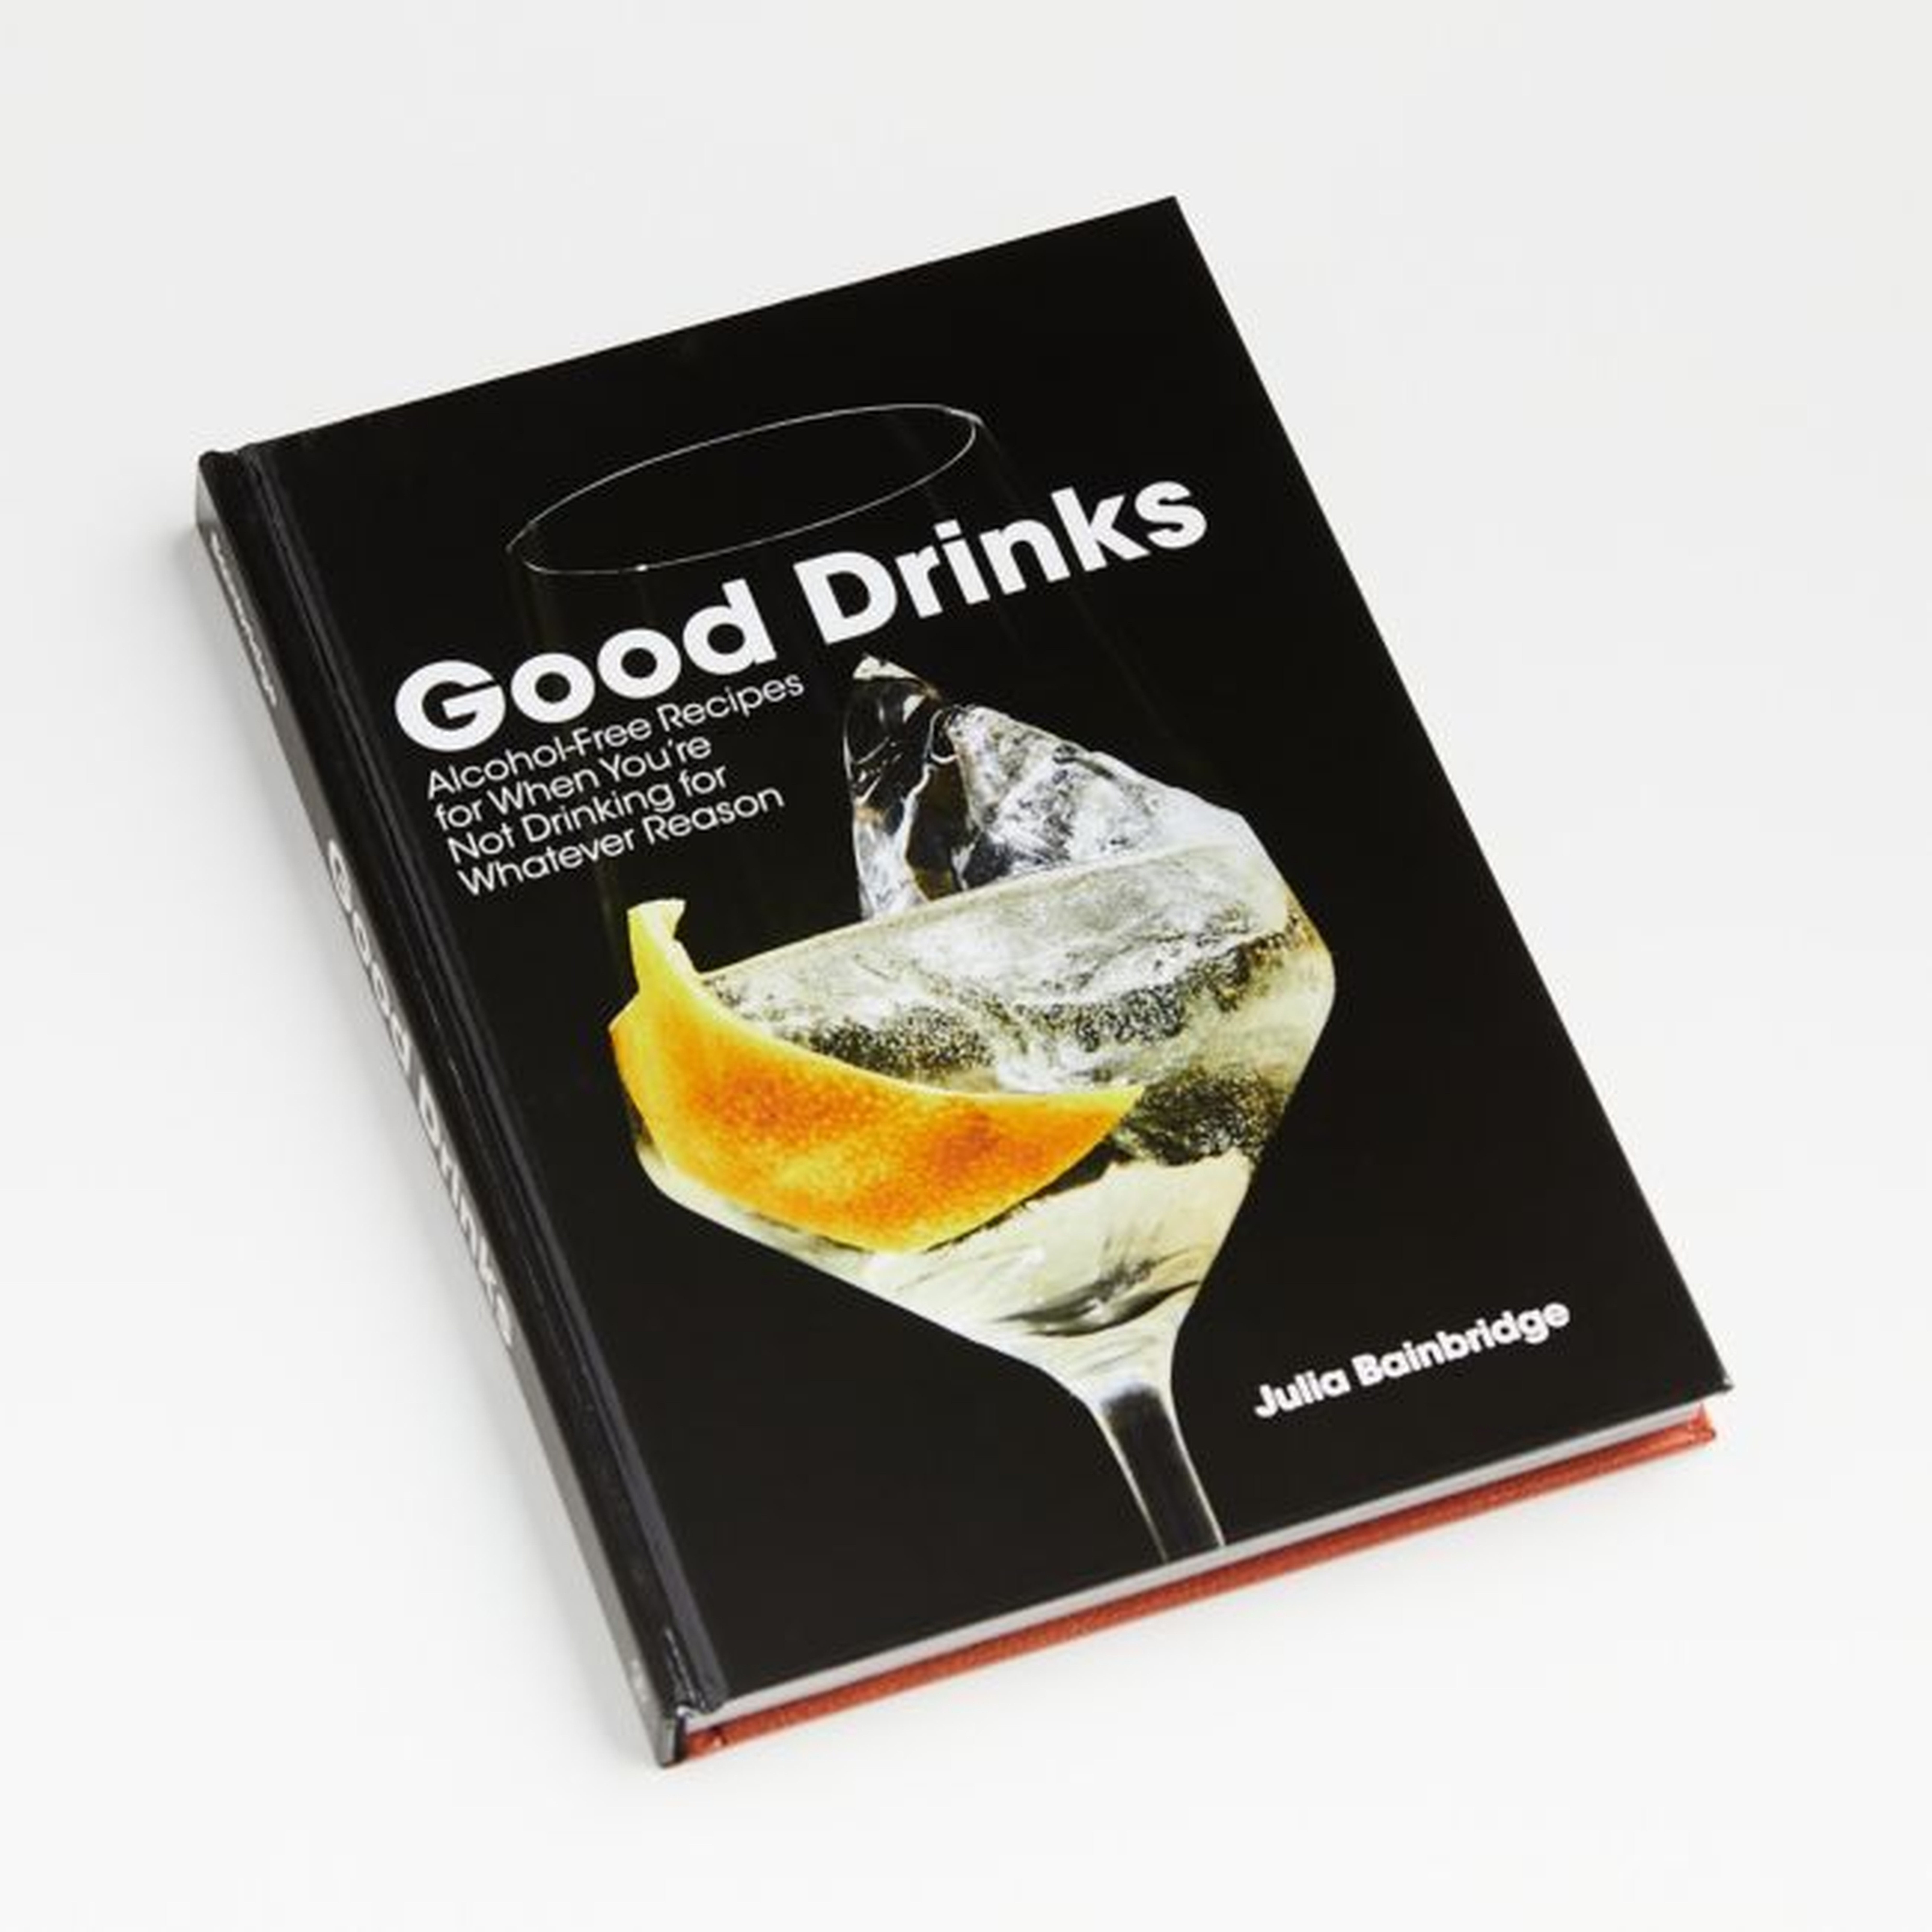 "Good Drinks" Book - Crate and Barrel